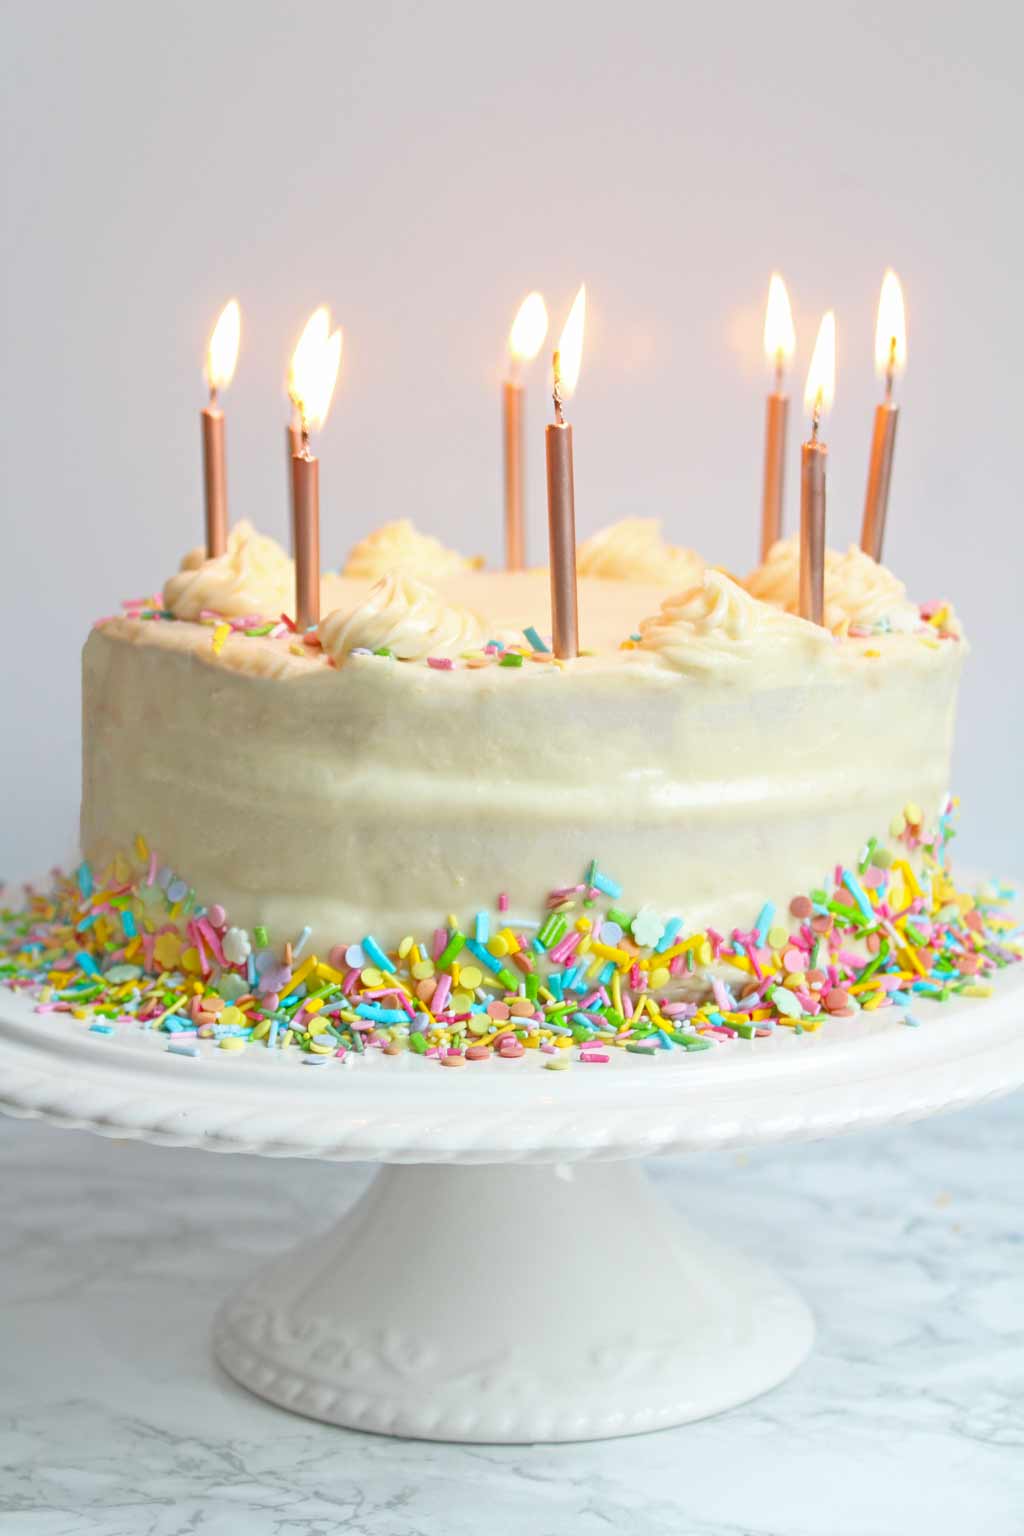 vegan birthday cake on a cake stand with candles lit